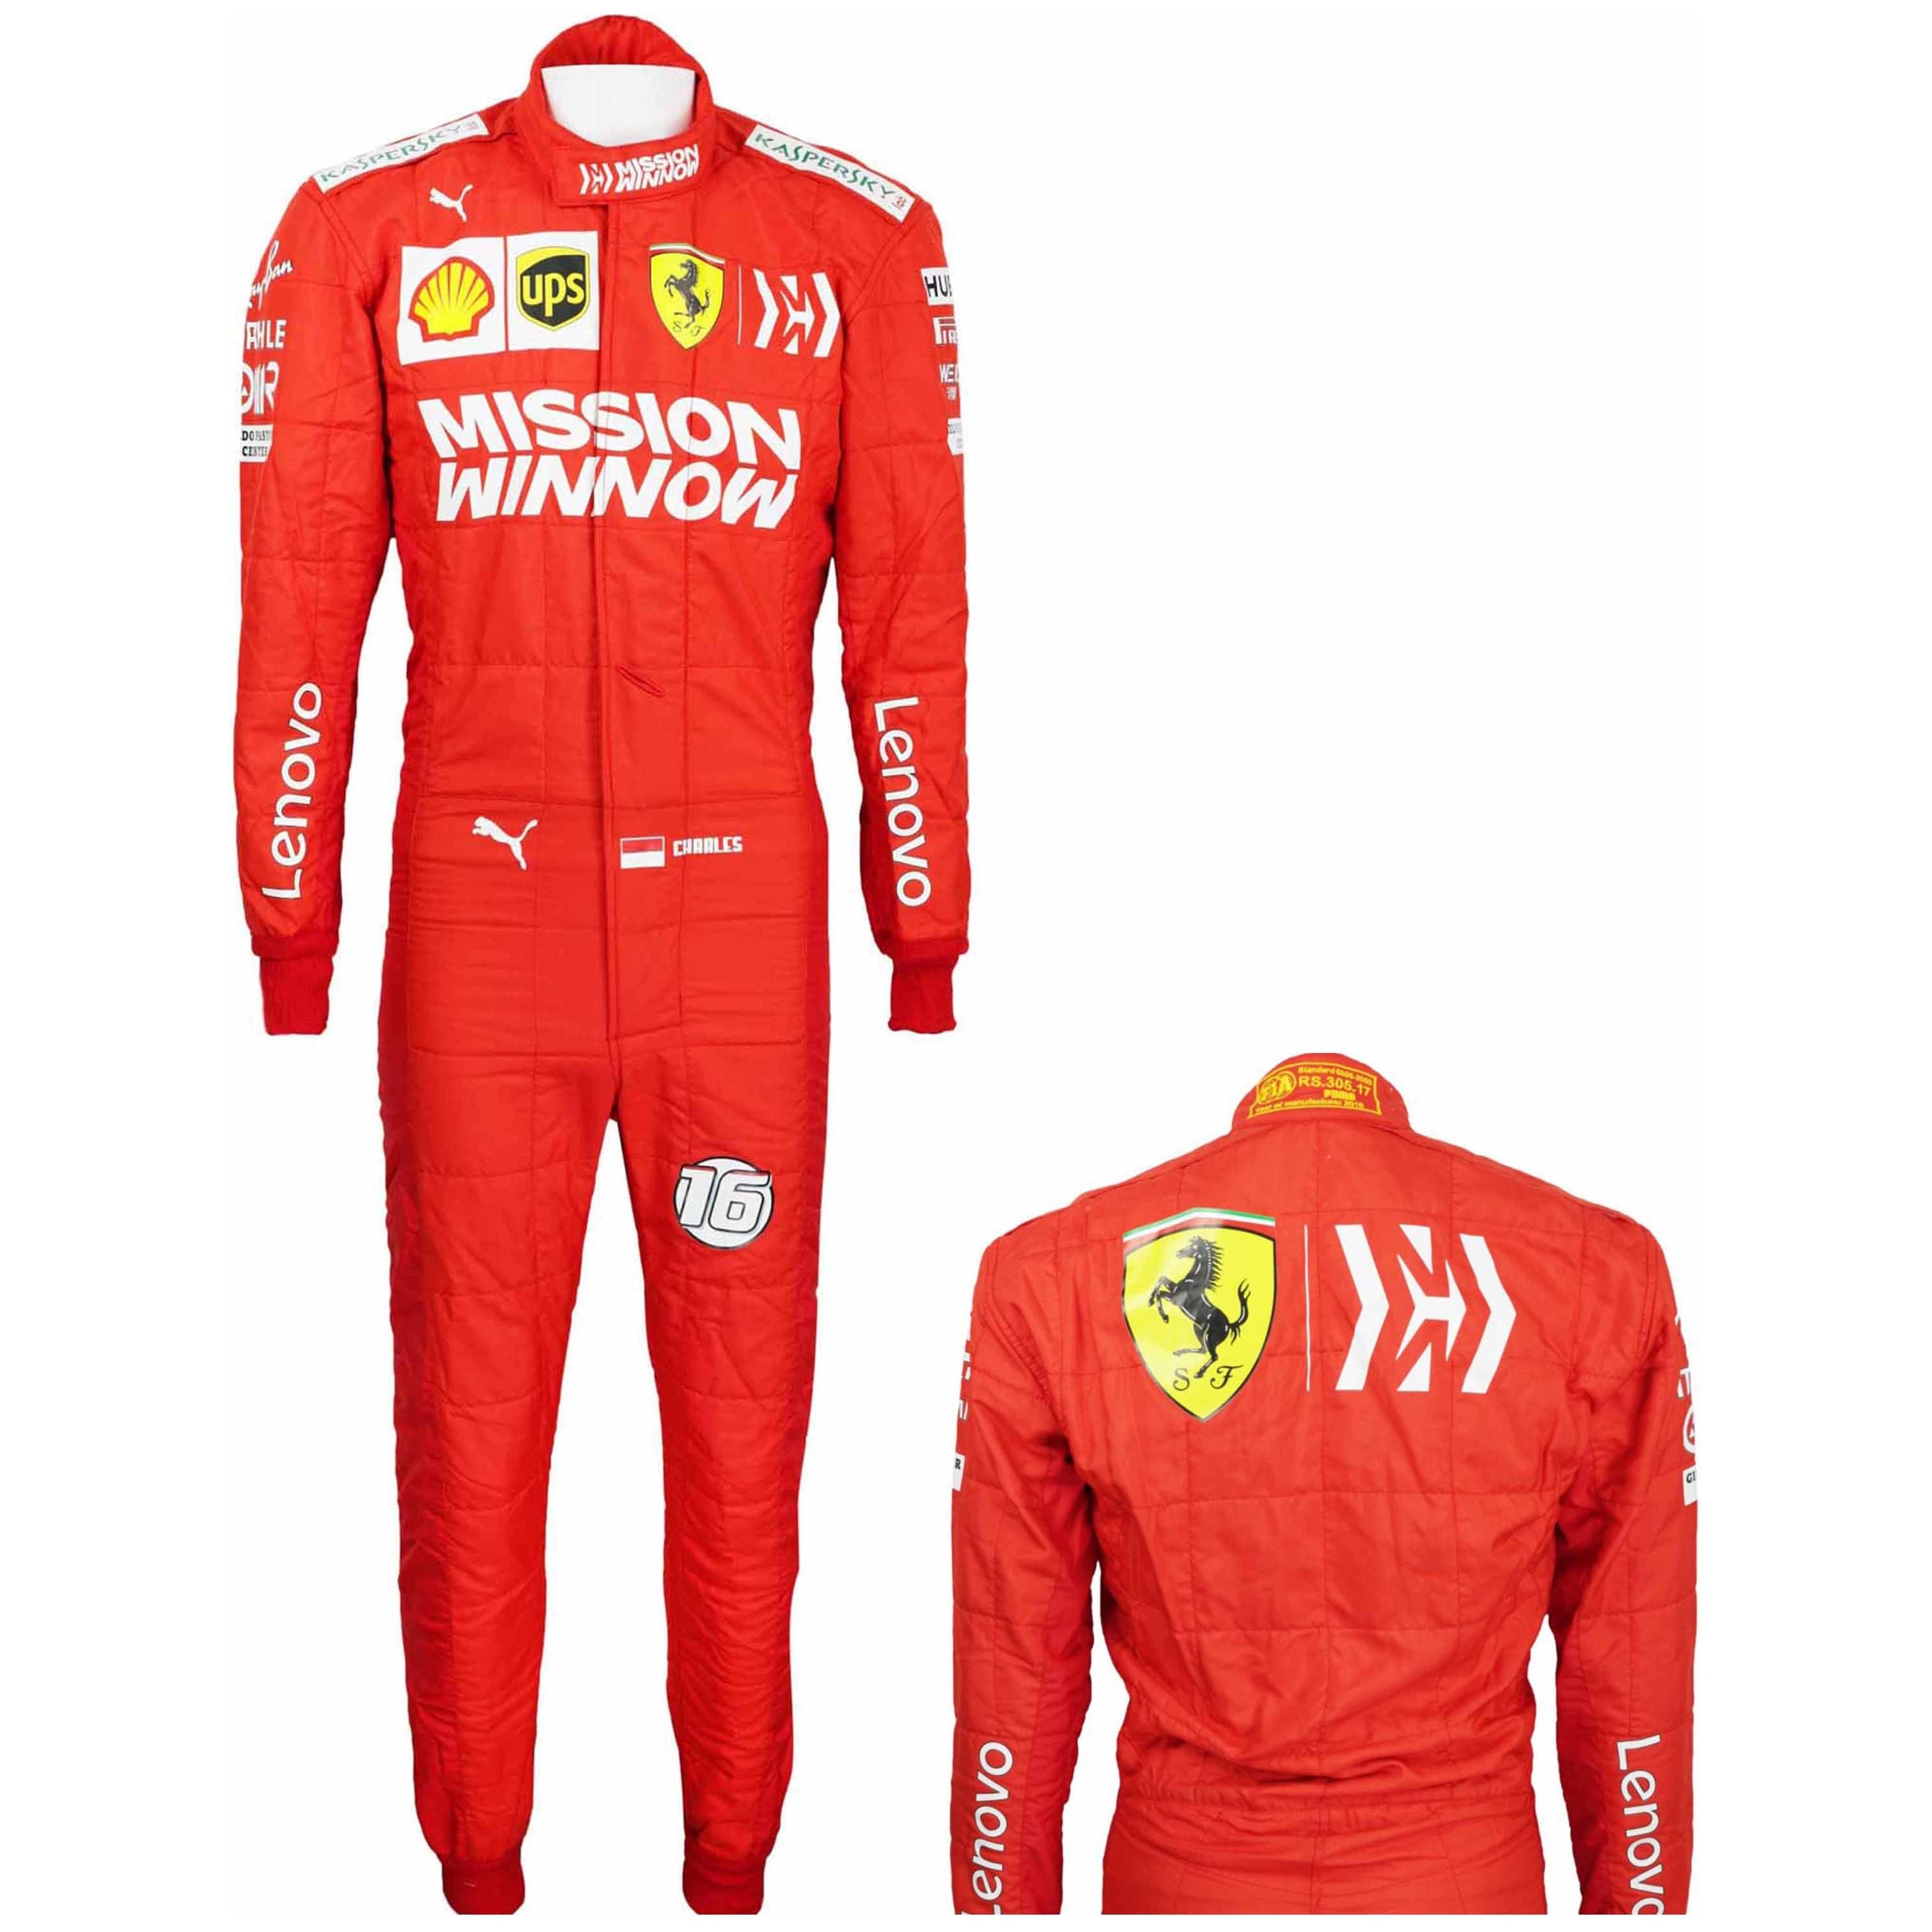 Go kart racing Sublimation Protective clothing Racing gear Suit NN-045